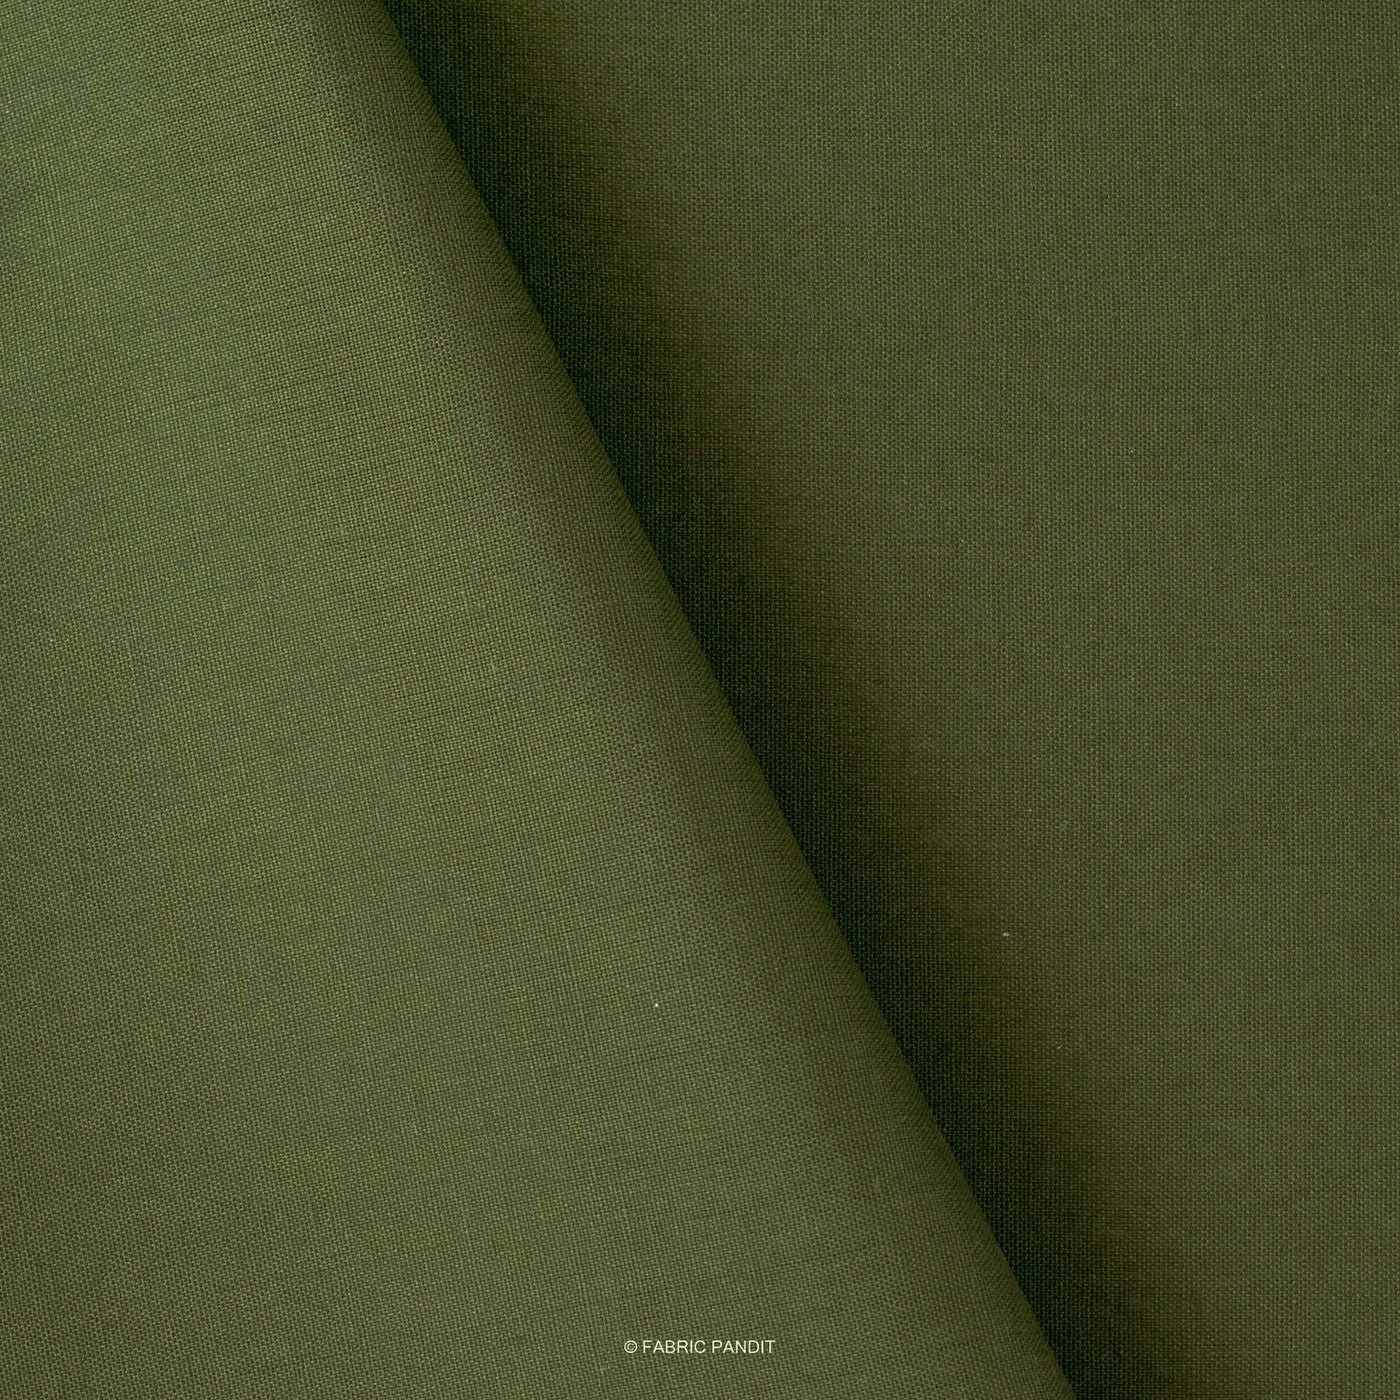 Cotton Linen Fabric Fabric Military Green Color Pure Cotton Linen Fabric (Width 52 Inches)